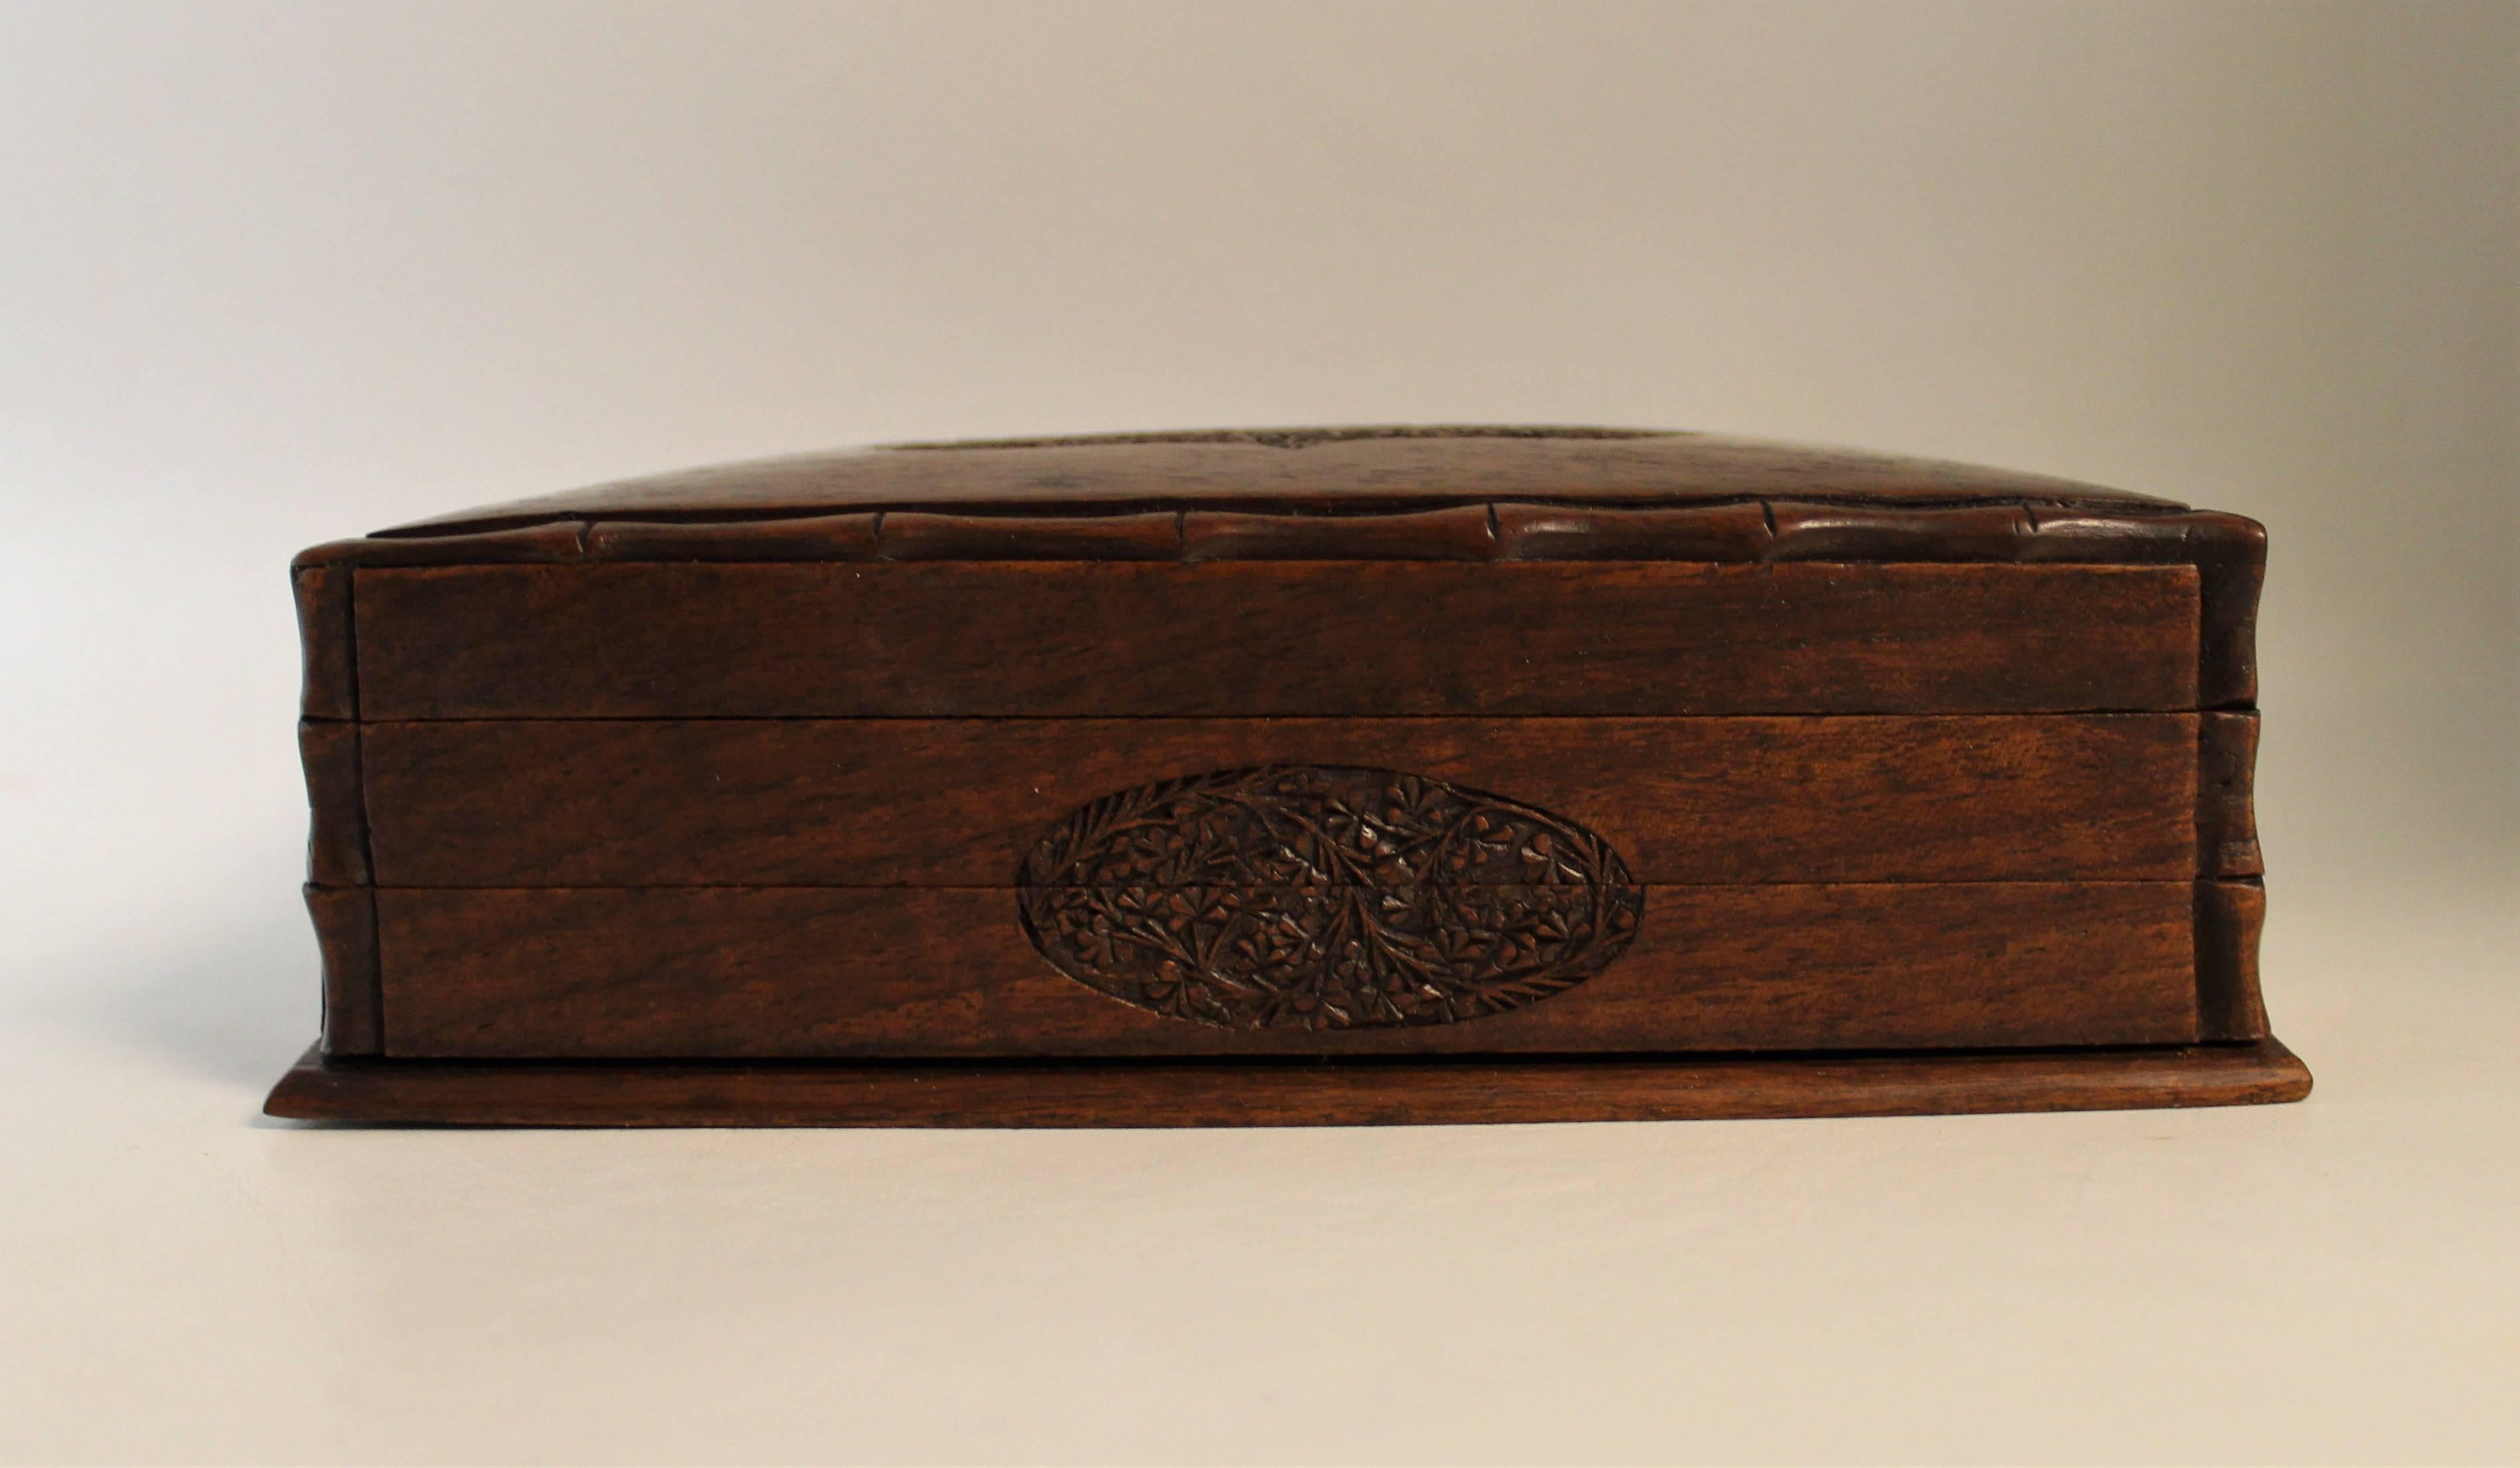 Edwardian hand-carved box with a trick opening. The box was designed as a table box for cigars, cigarettes or games It also features a trick way of opening it in which you have to slide a strip across on the front of the box.